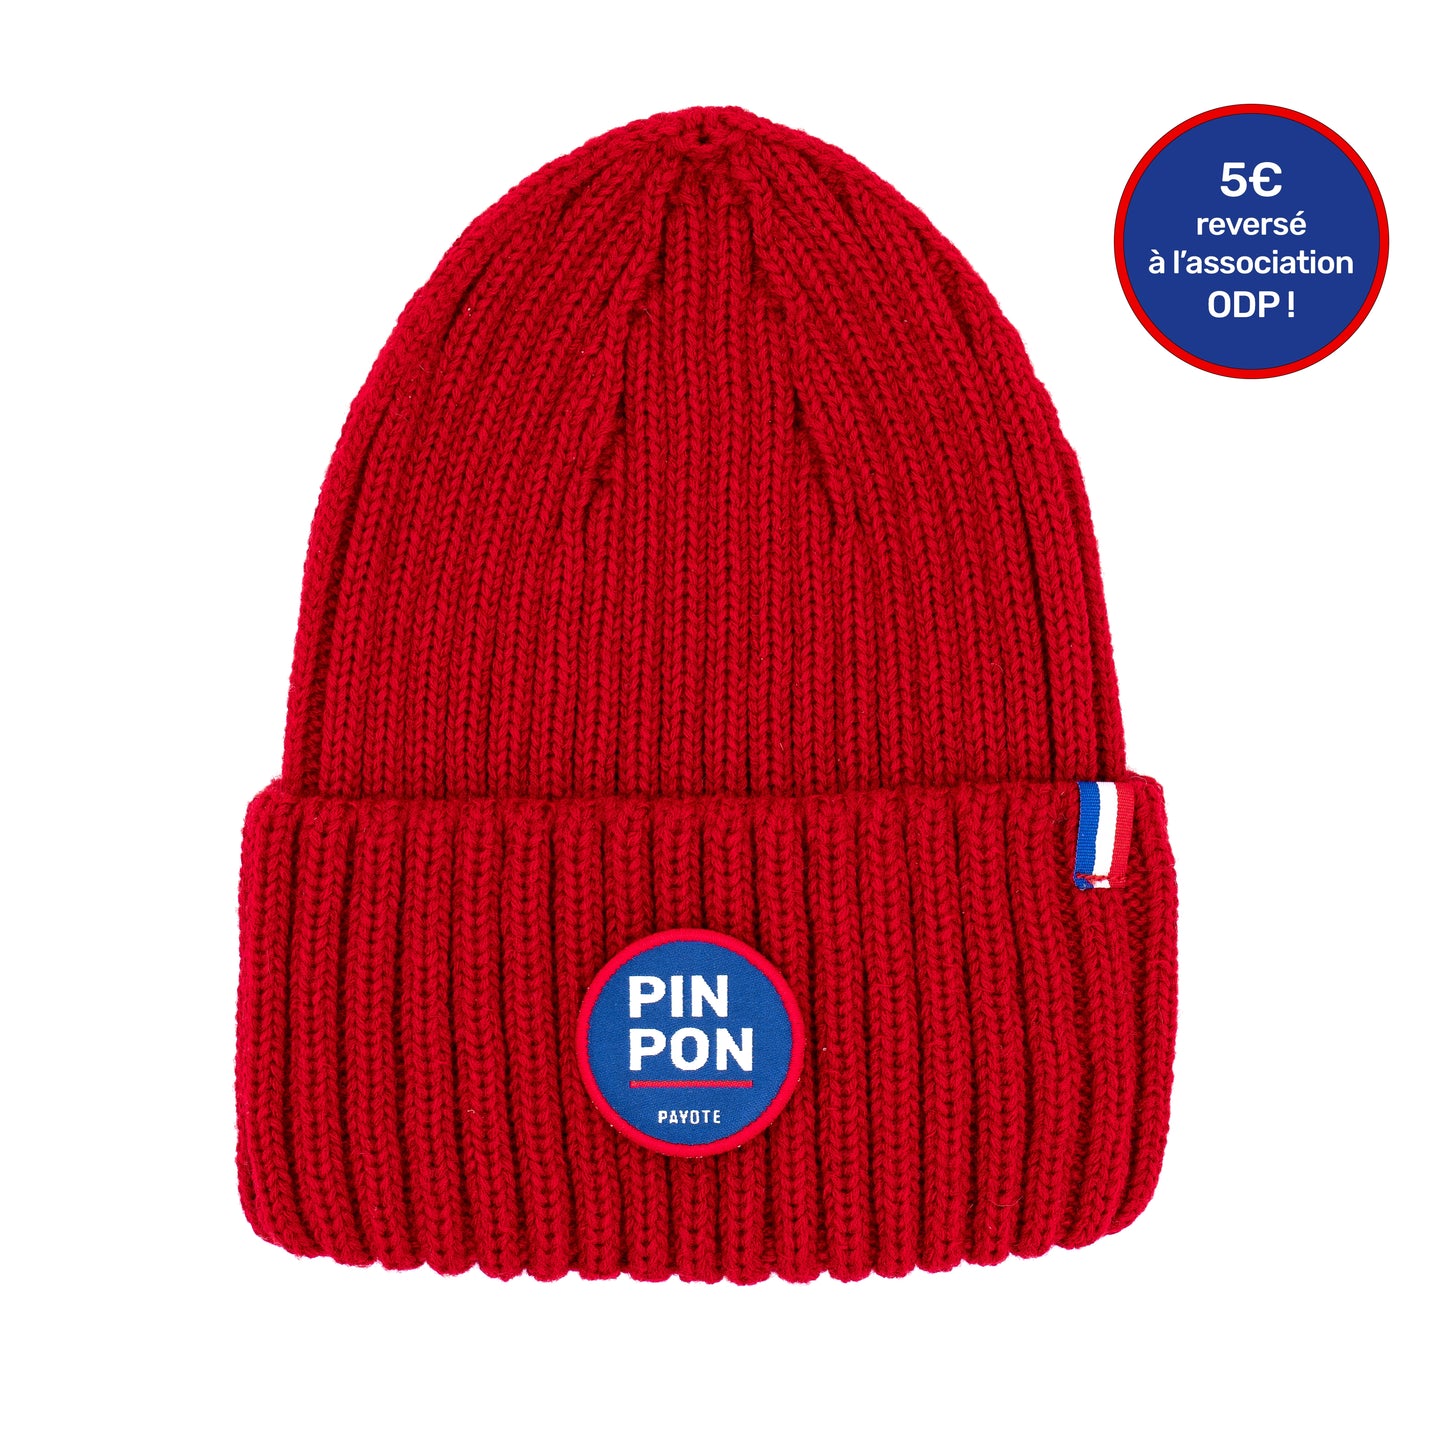 Bonnet rouge Pin Pon made in France